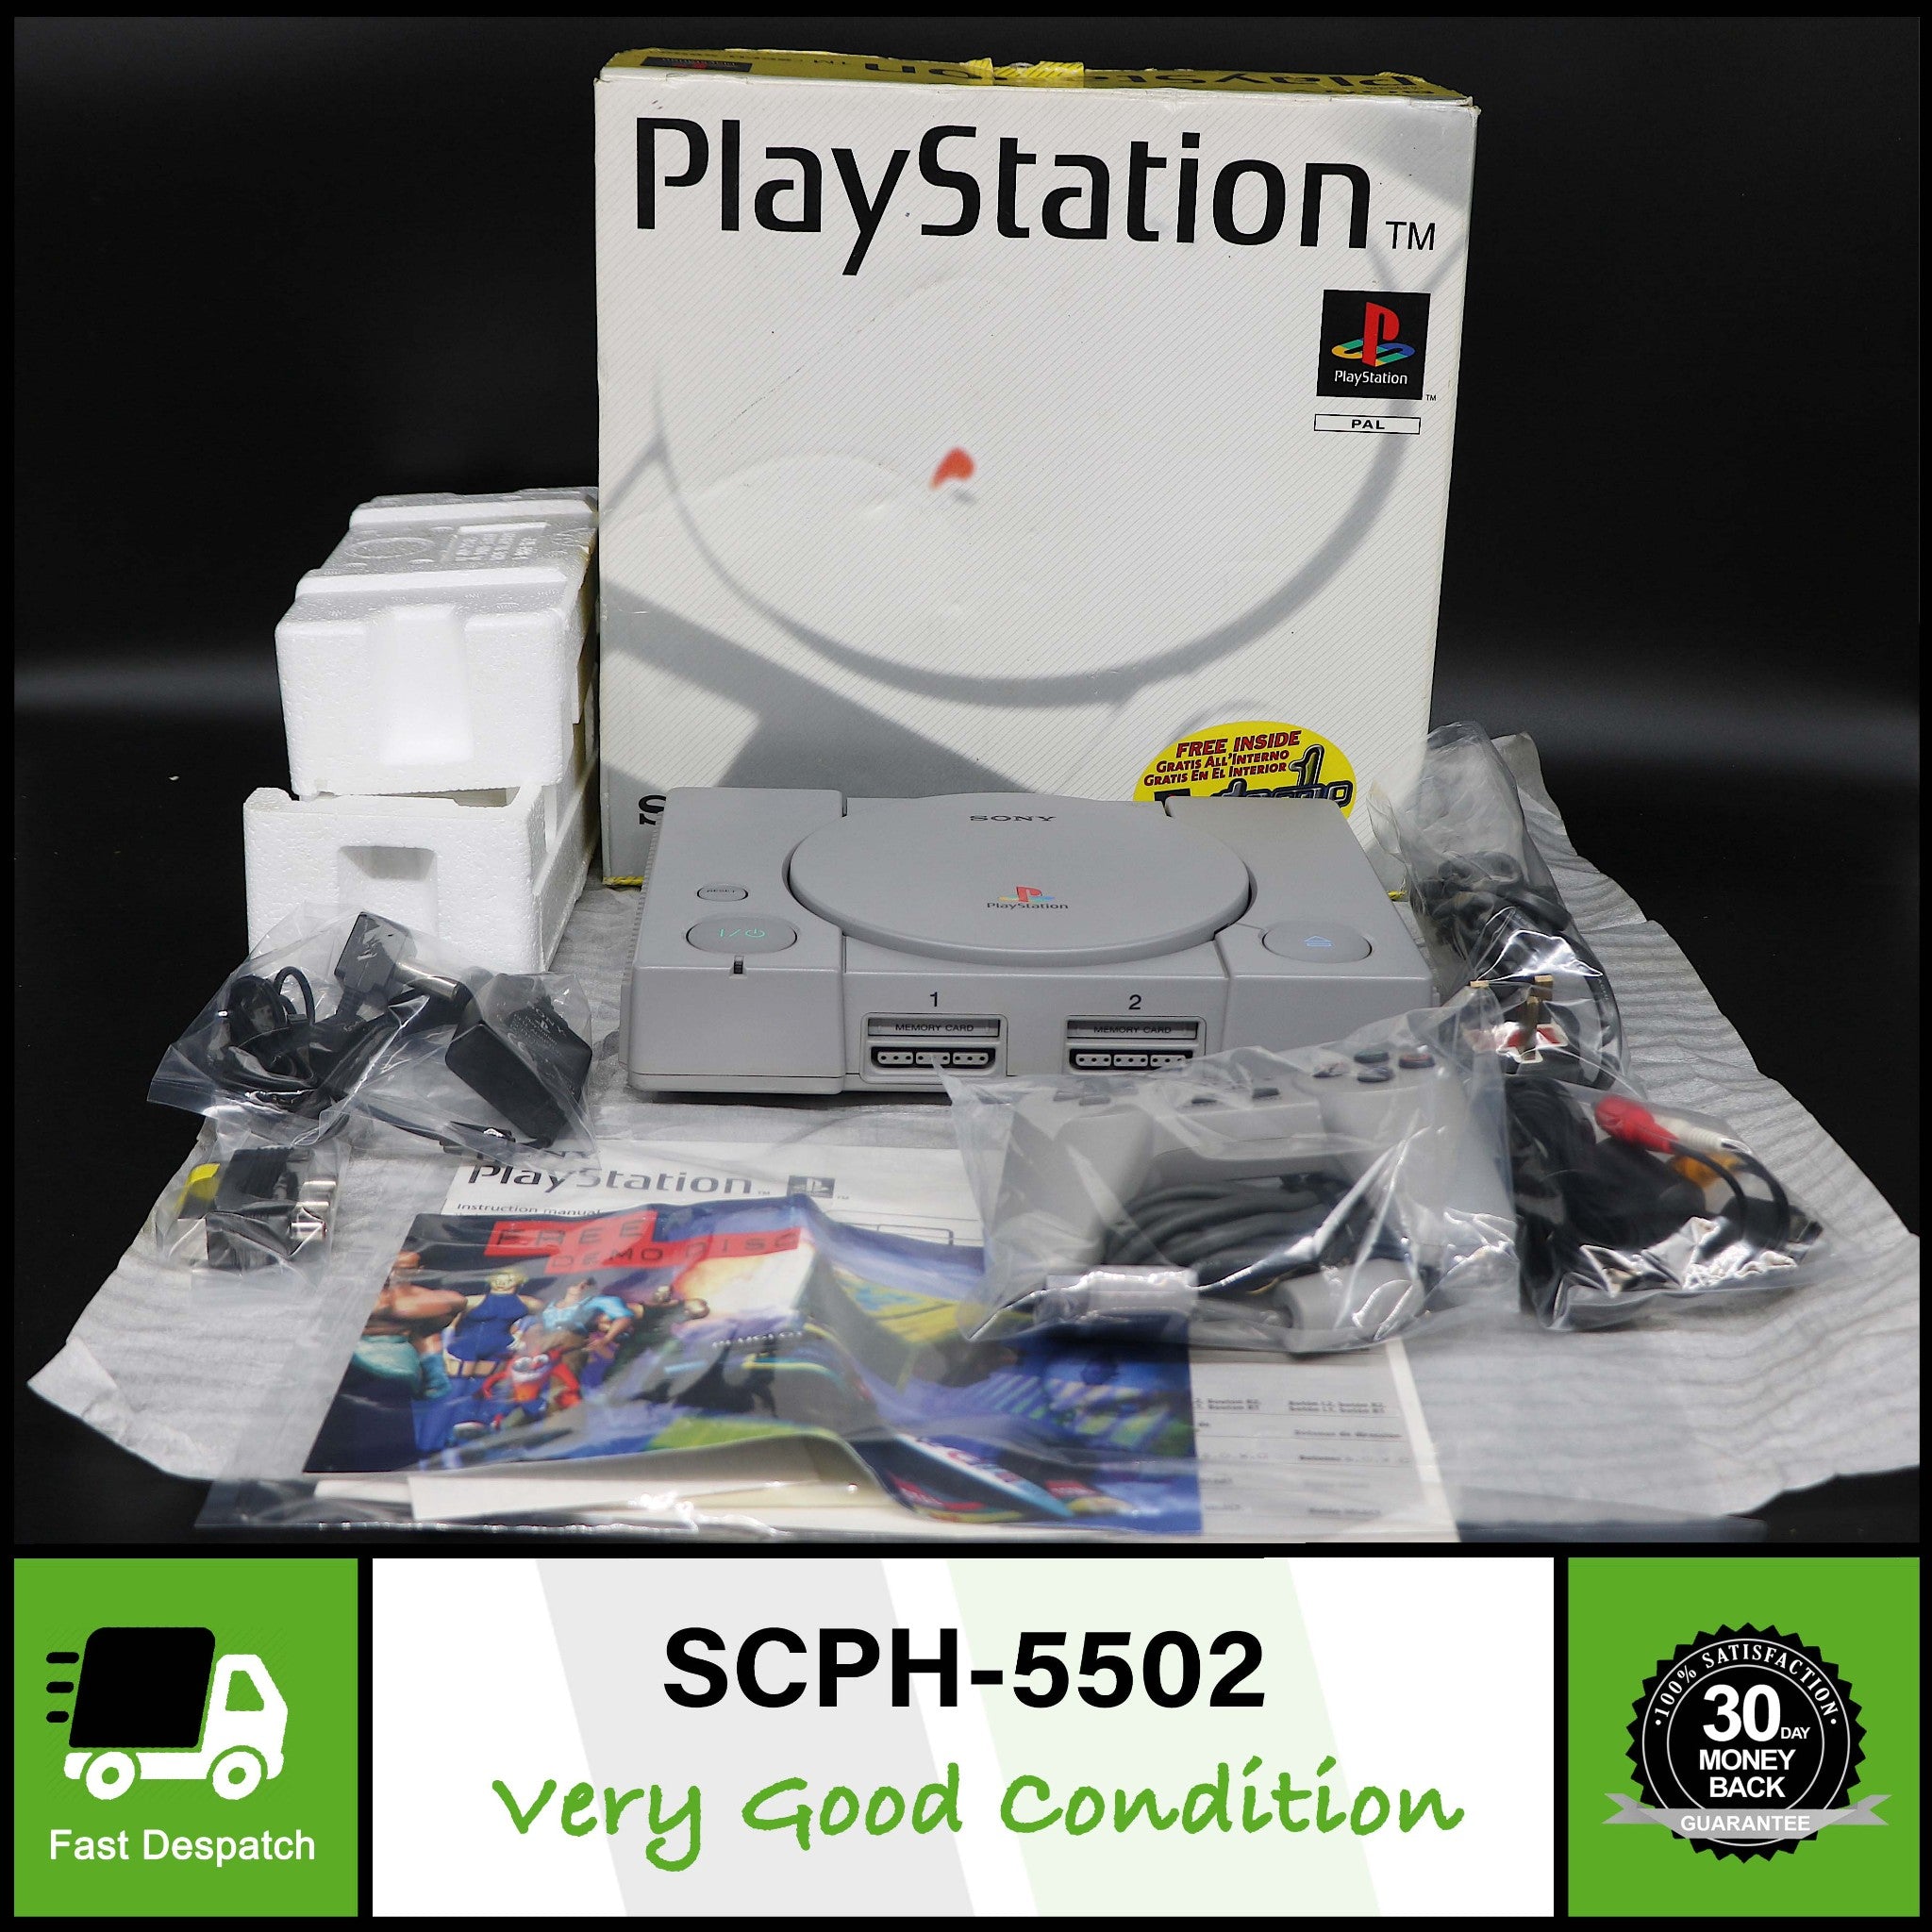 Fat Sony Playstation PS1 System Console SCPH-5502 | Boxed Very Nice Condition